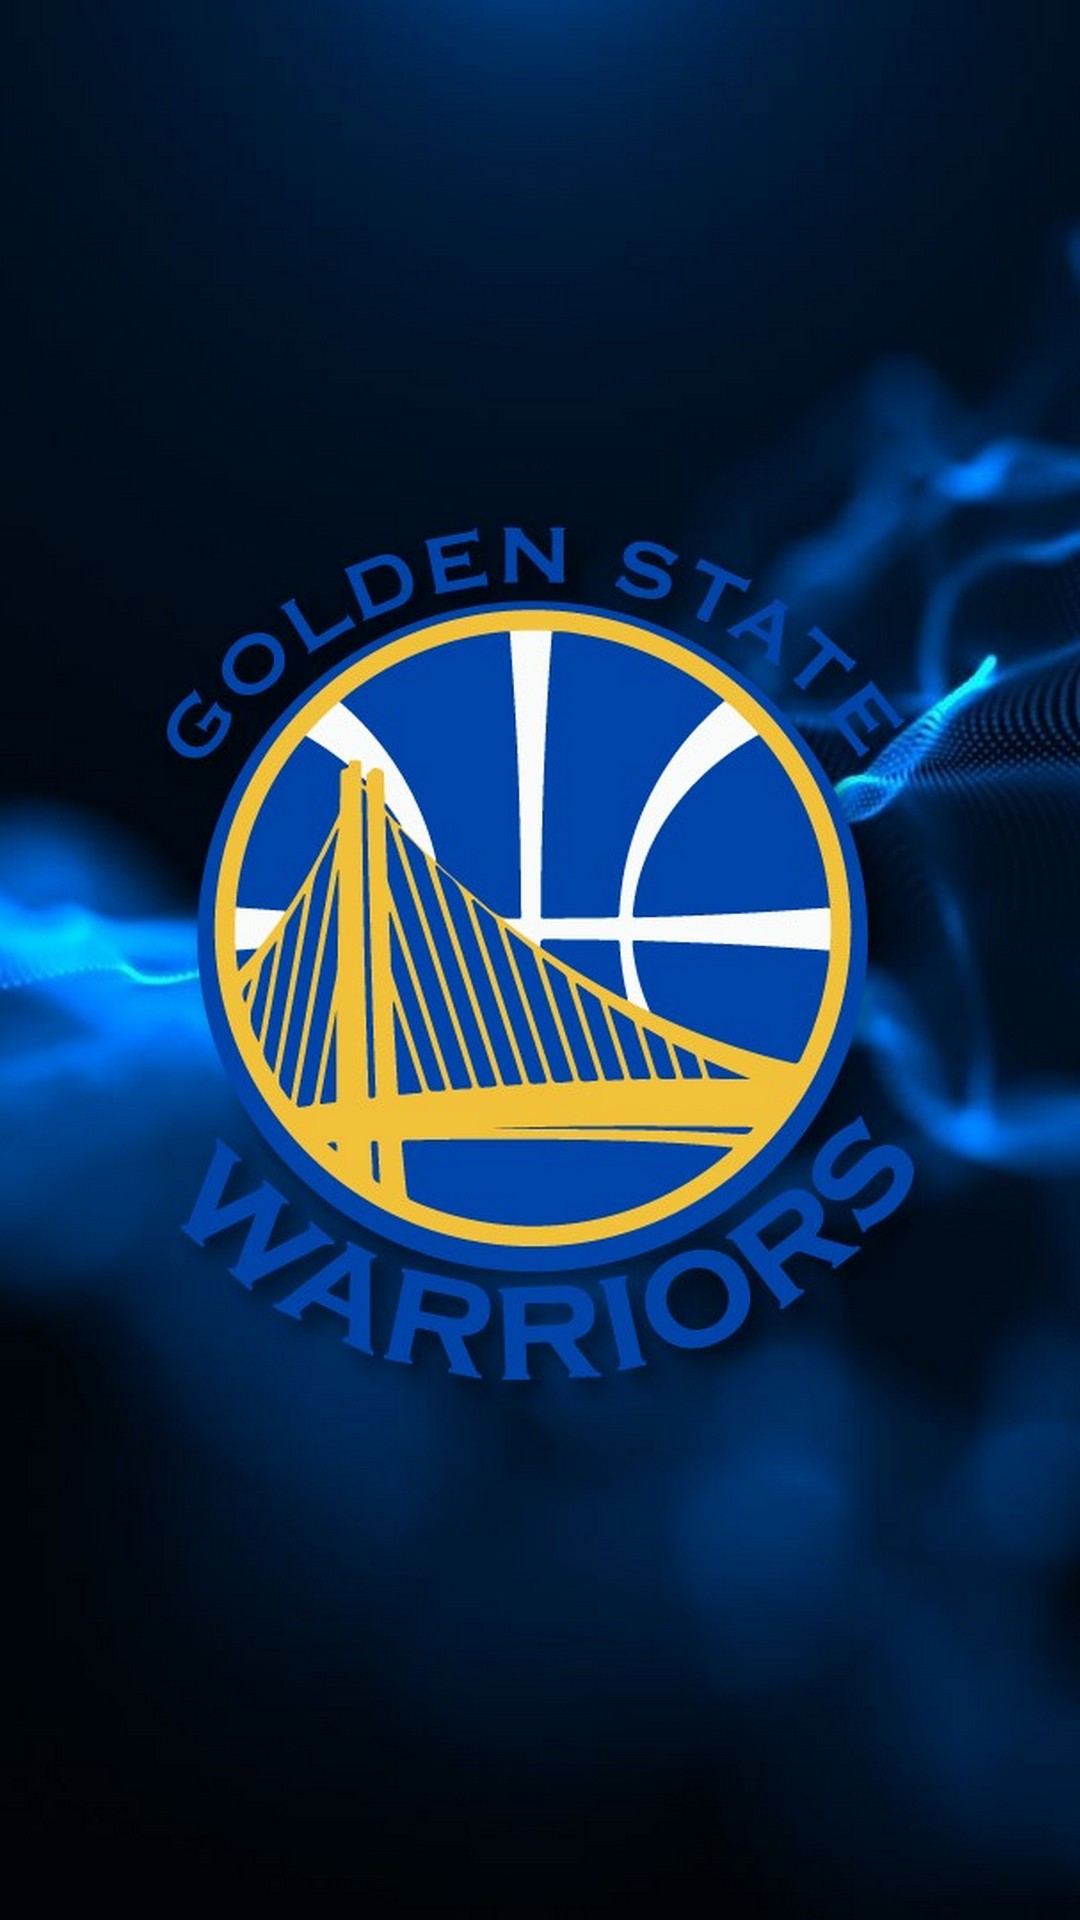 Golden State Warriors iPhone Wallpaper HD with image resolution 1080x1920 pixel. You can make this wallpaper for your Desktop Computer Backgrounds, Mac Wallpapers, Android Lock screen or iPhone Screensavers